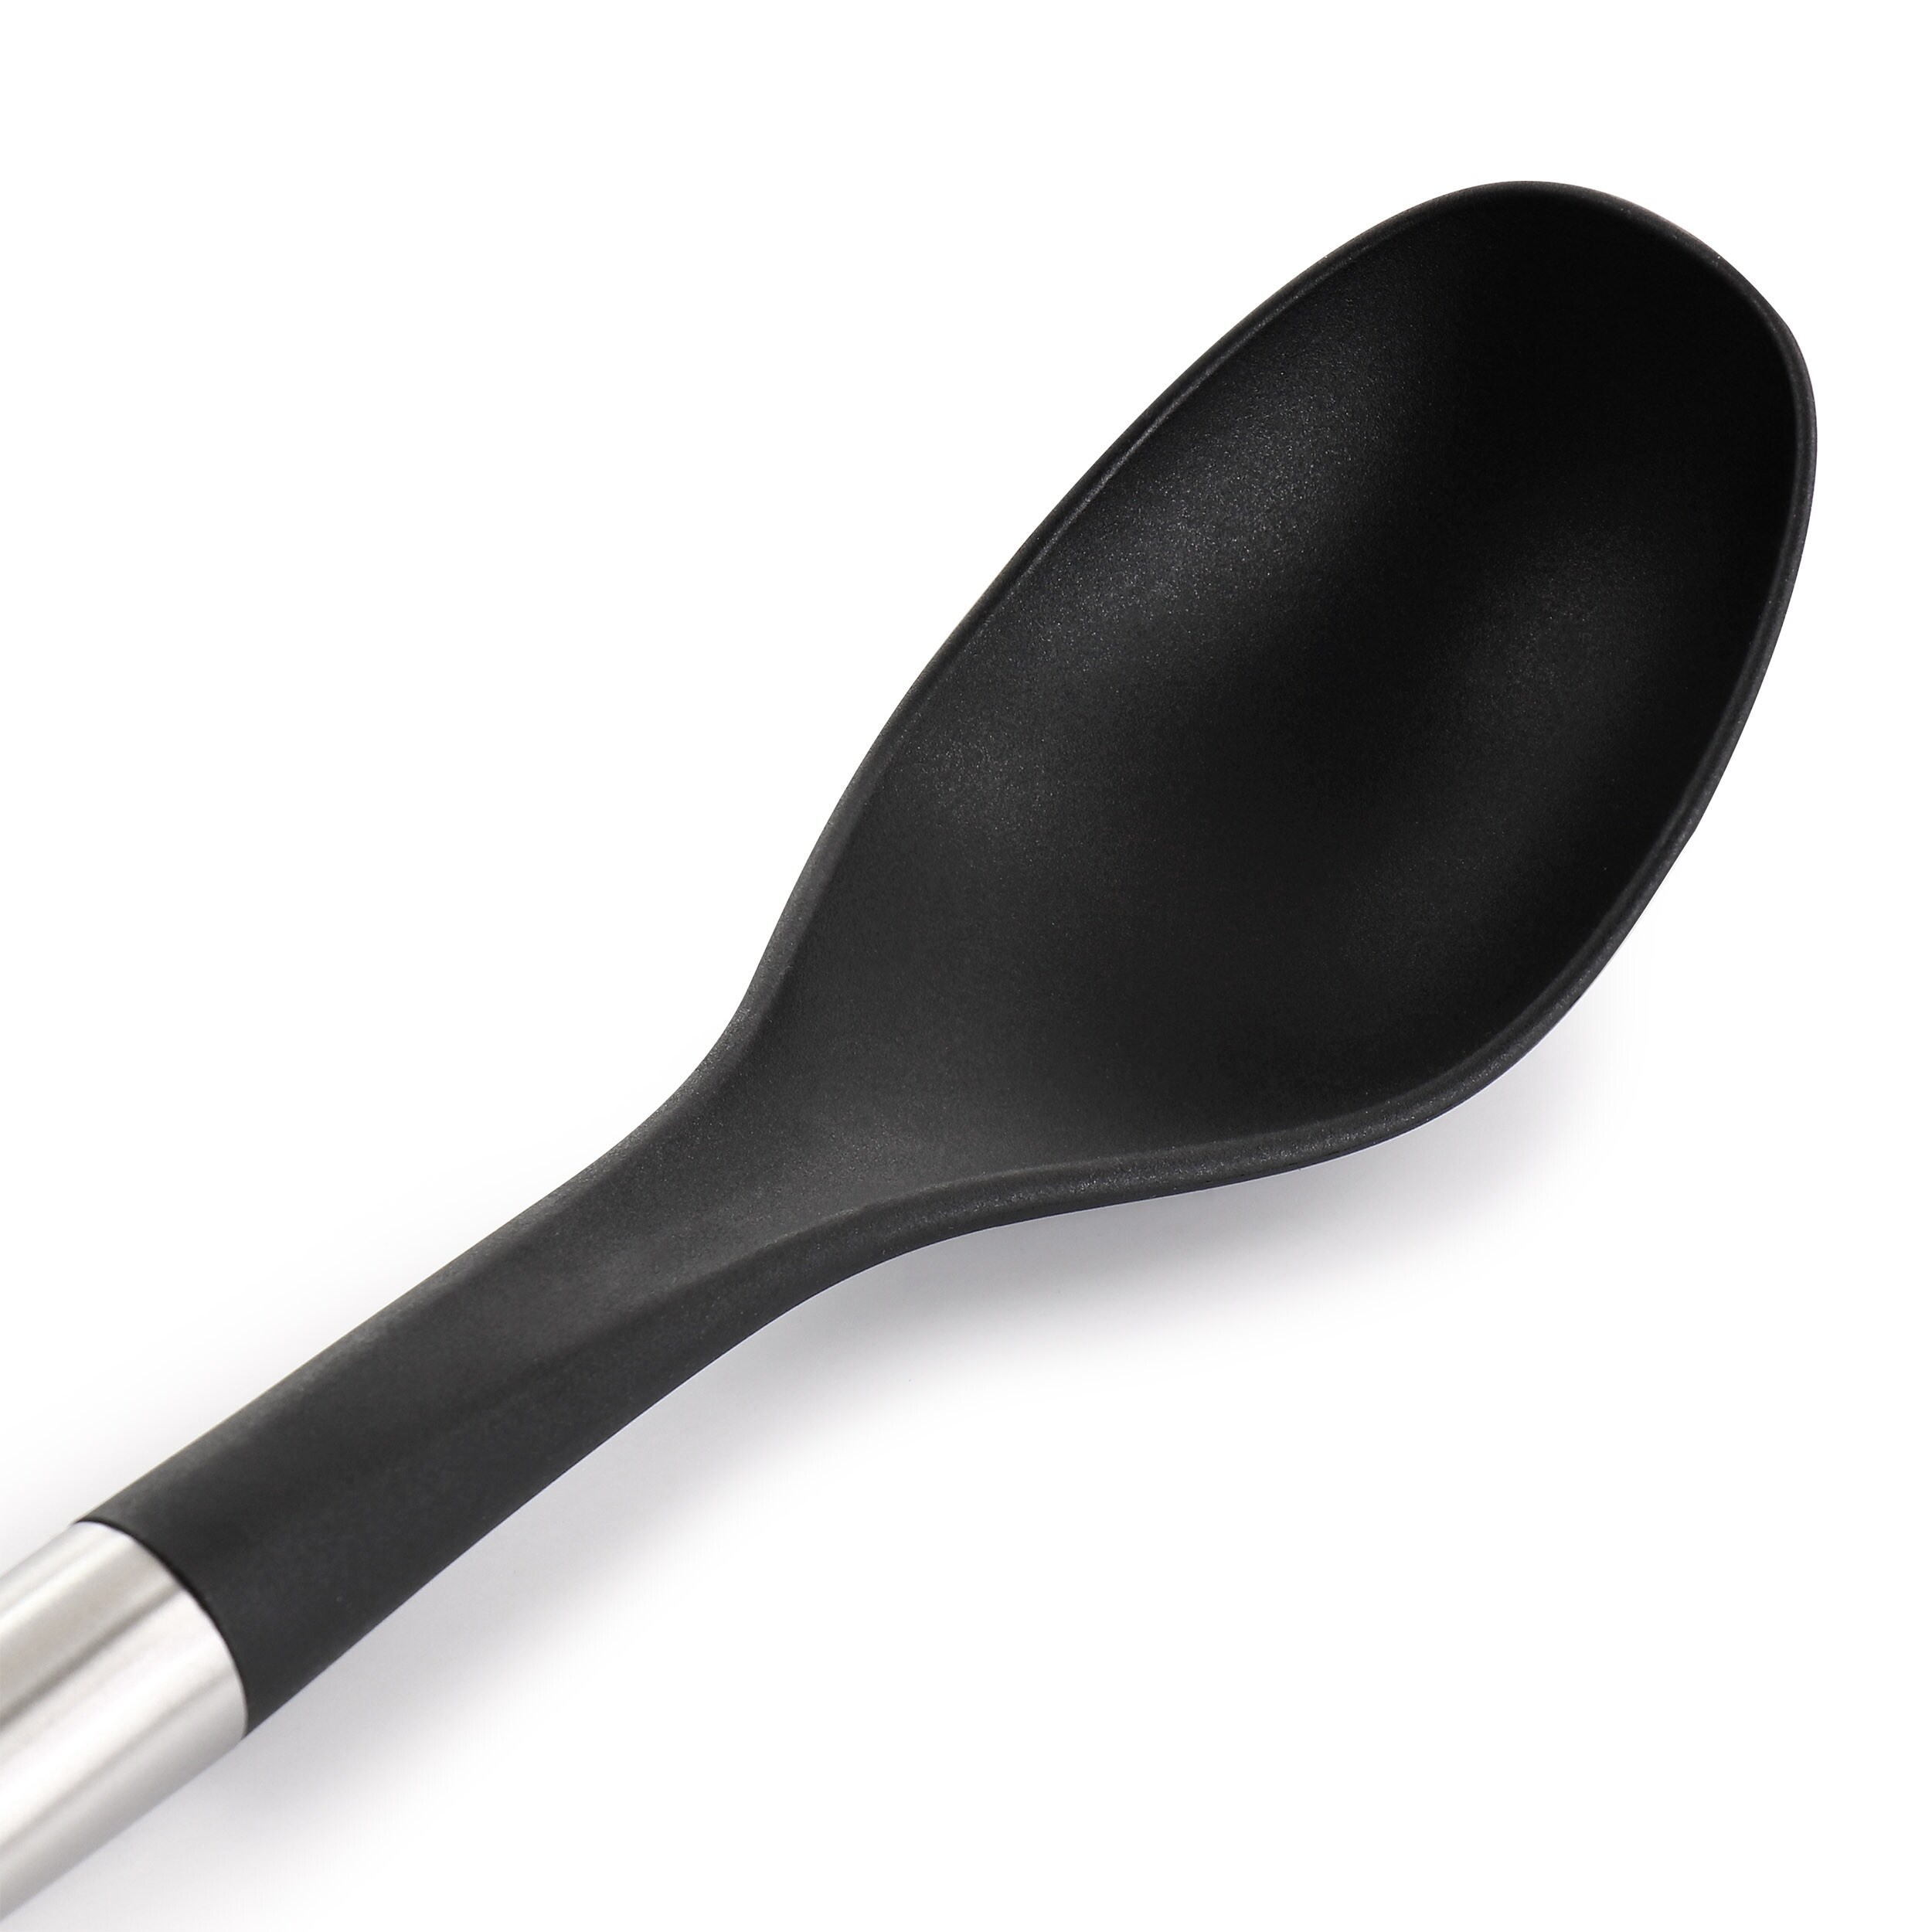 https://ak1.ostkcdn.com/images/products/is/images/direct/0403897b4e7df0a1a67c15aa48e4721bcdf53faa/Oster-Baldwyn-Stainless-Steel-and-Nylon-Solid-Spoon.jpg